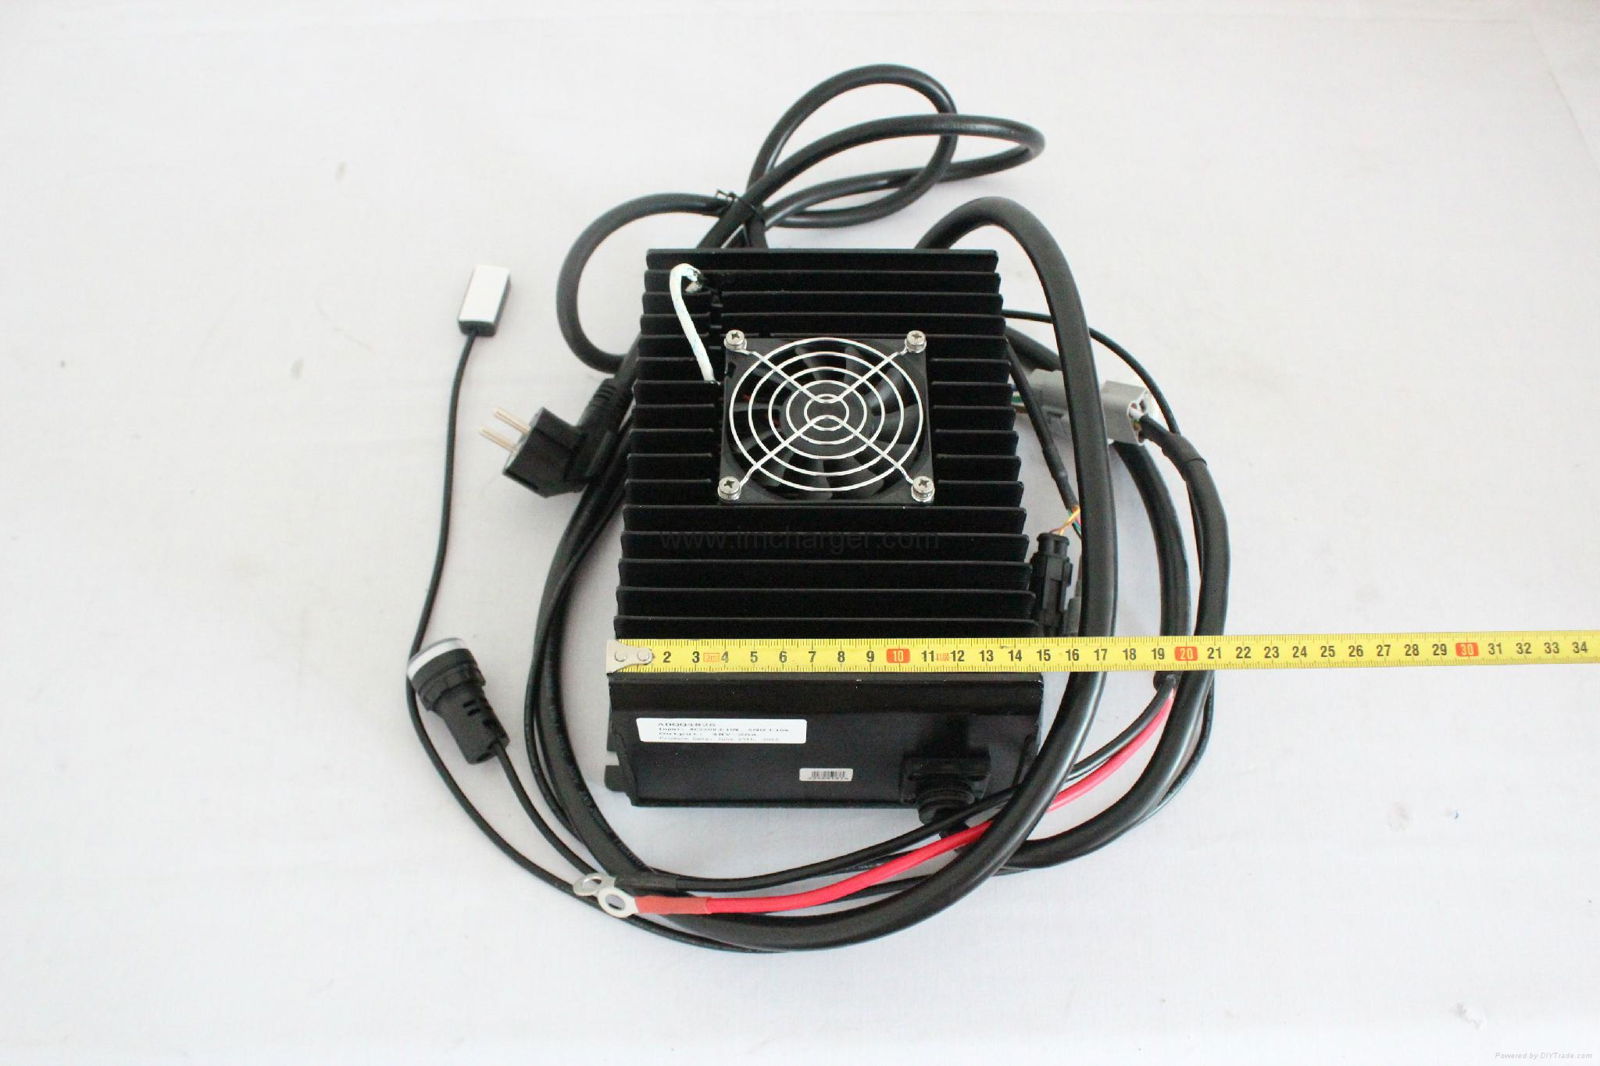 High quality battery charger 36V 21A for EzGo golf car with EzGo plug 5